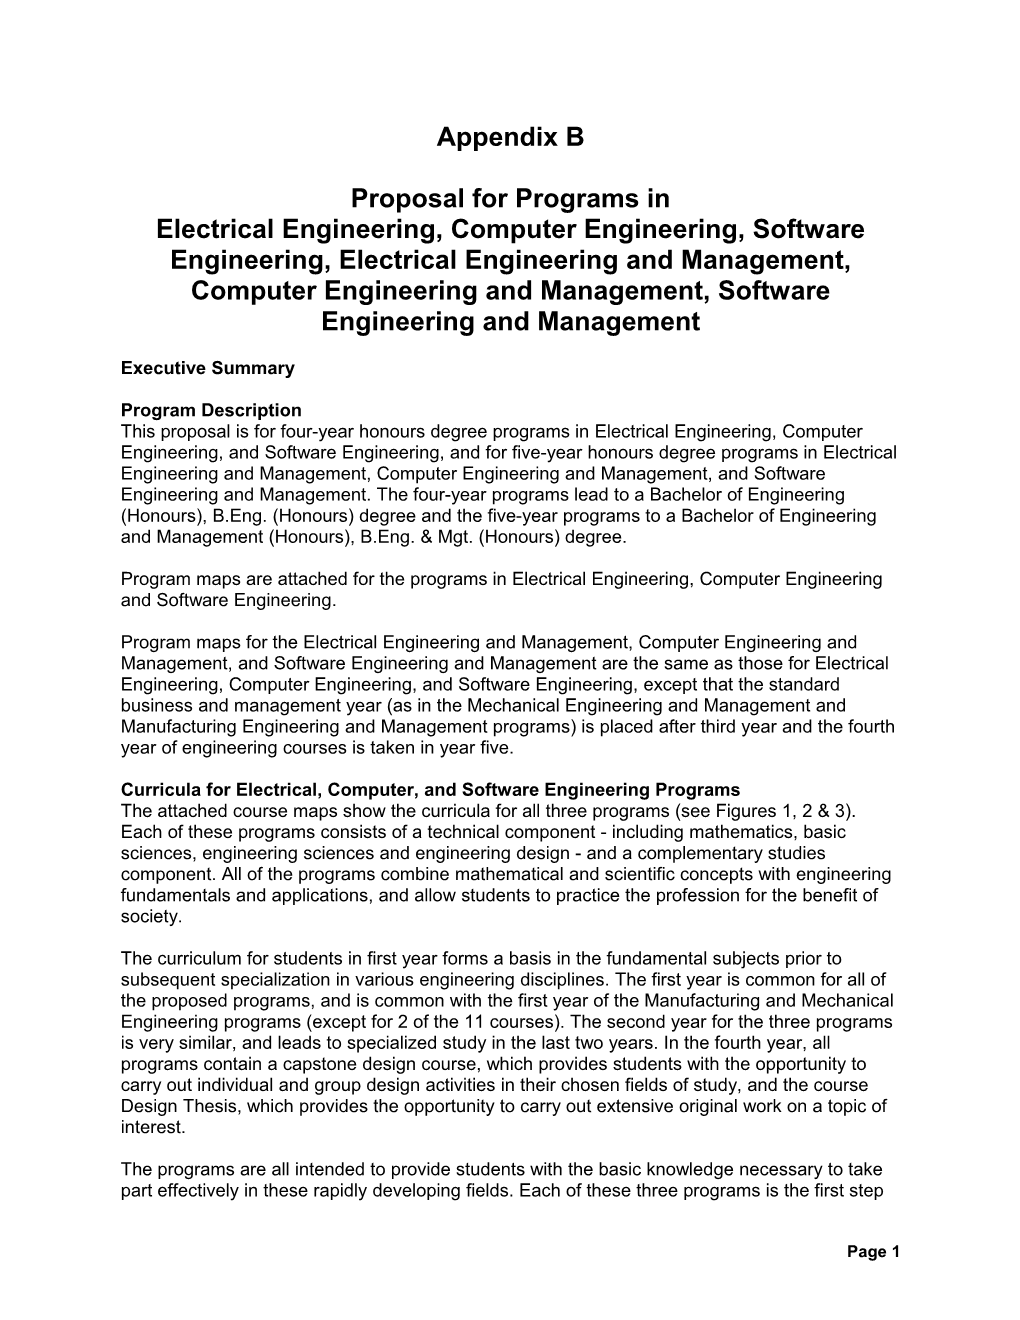 Proposal for Programs In